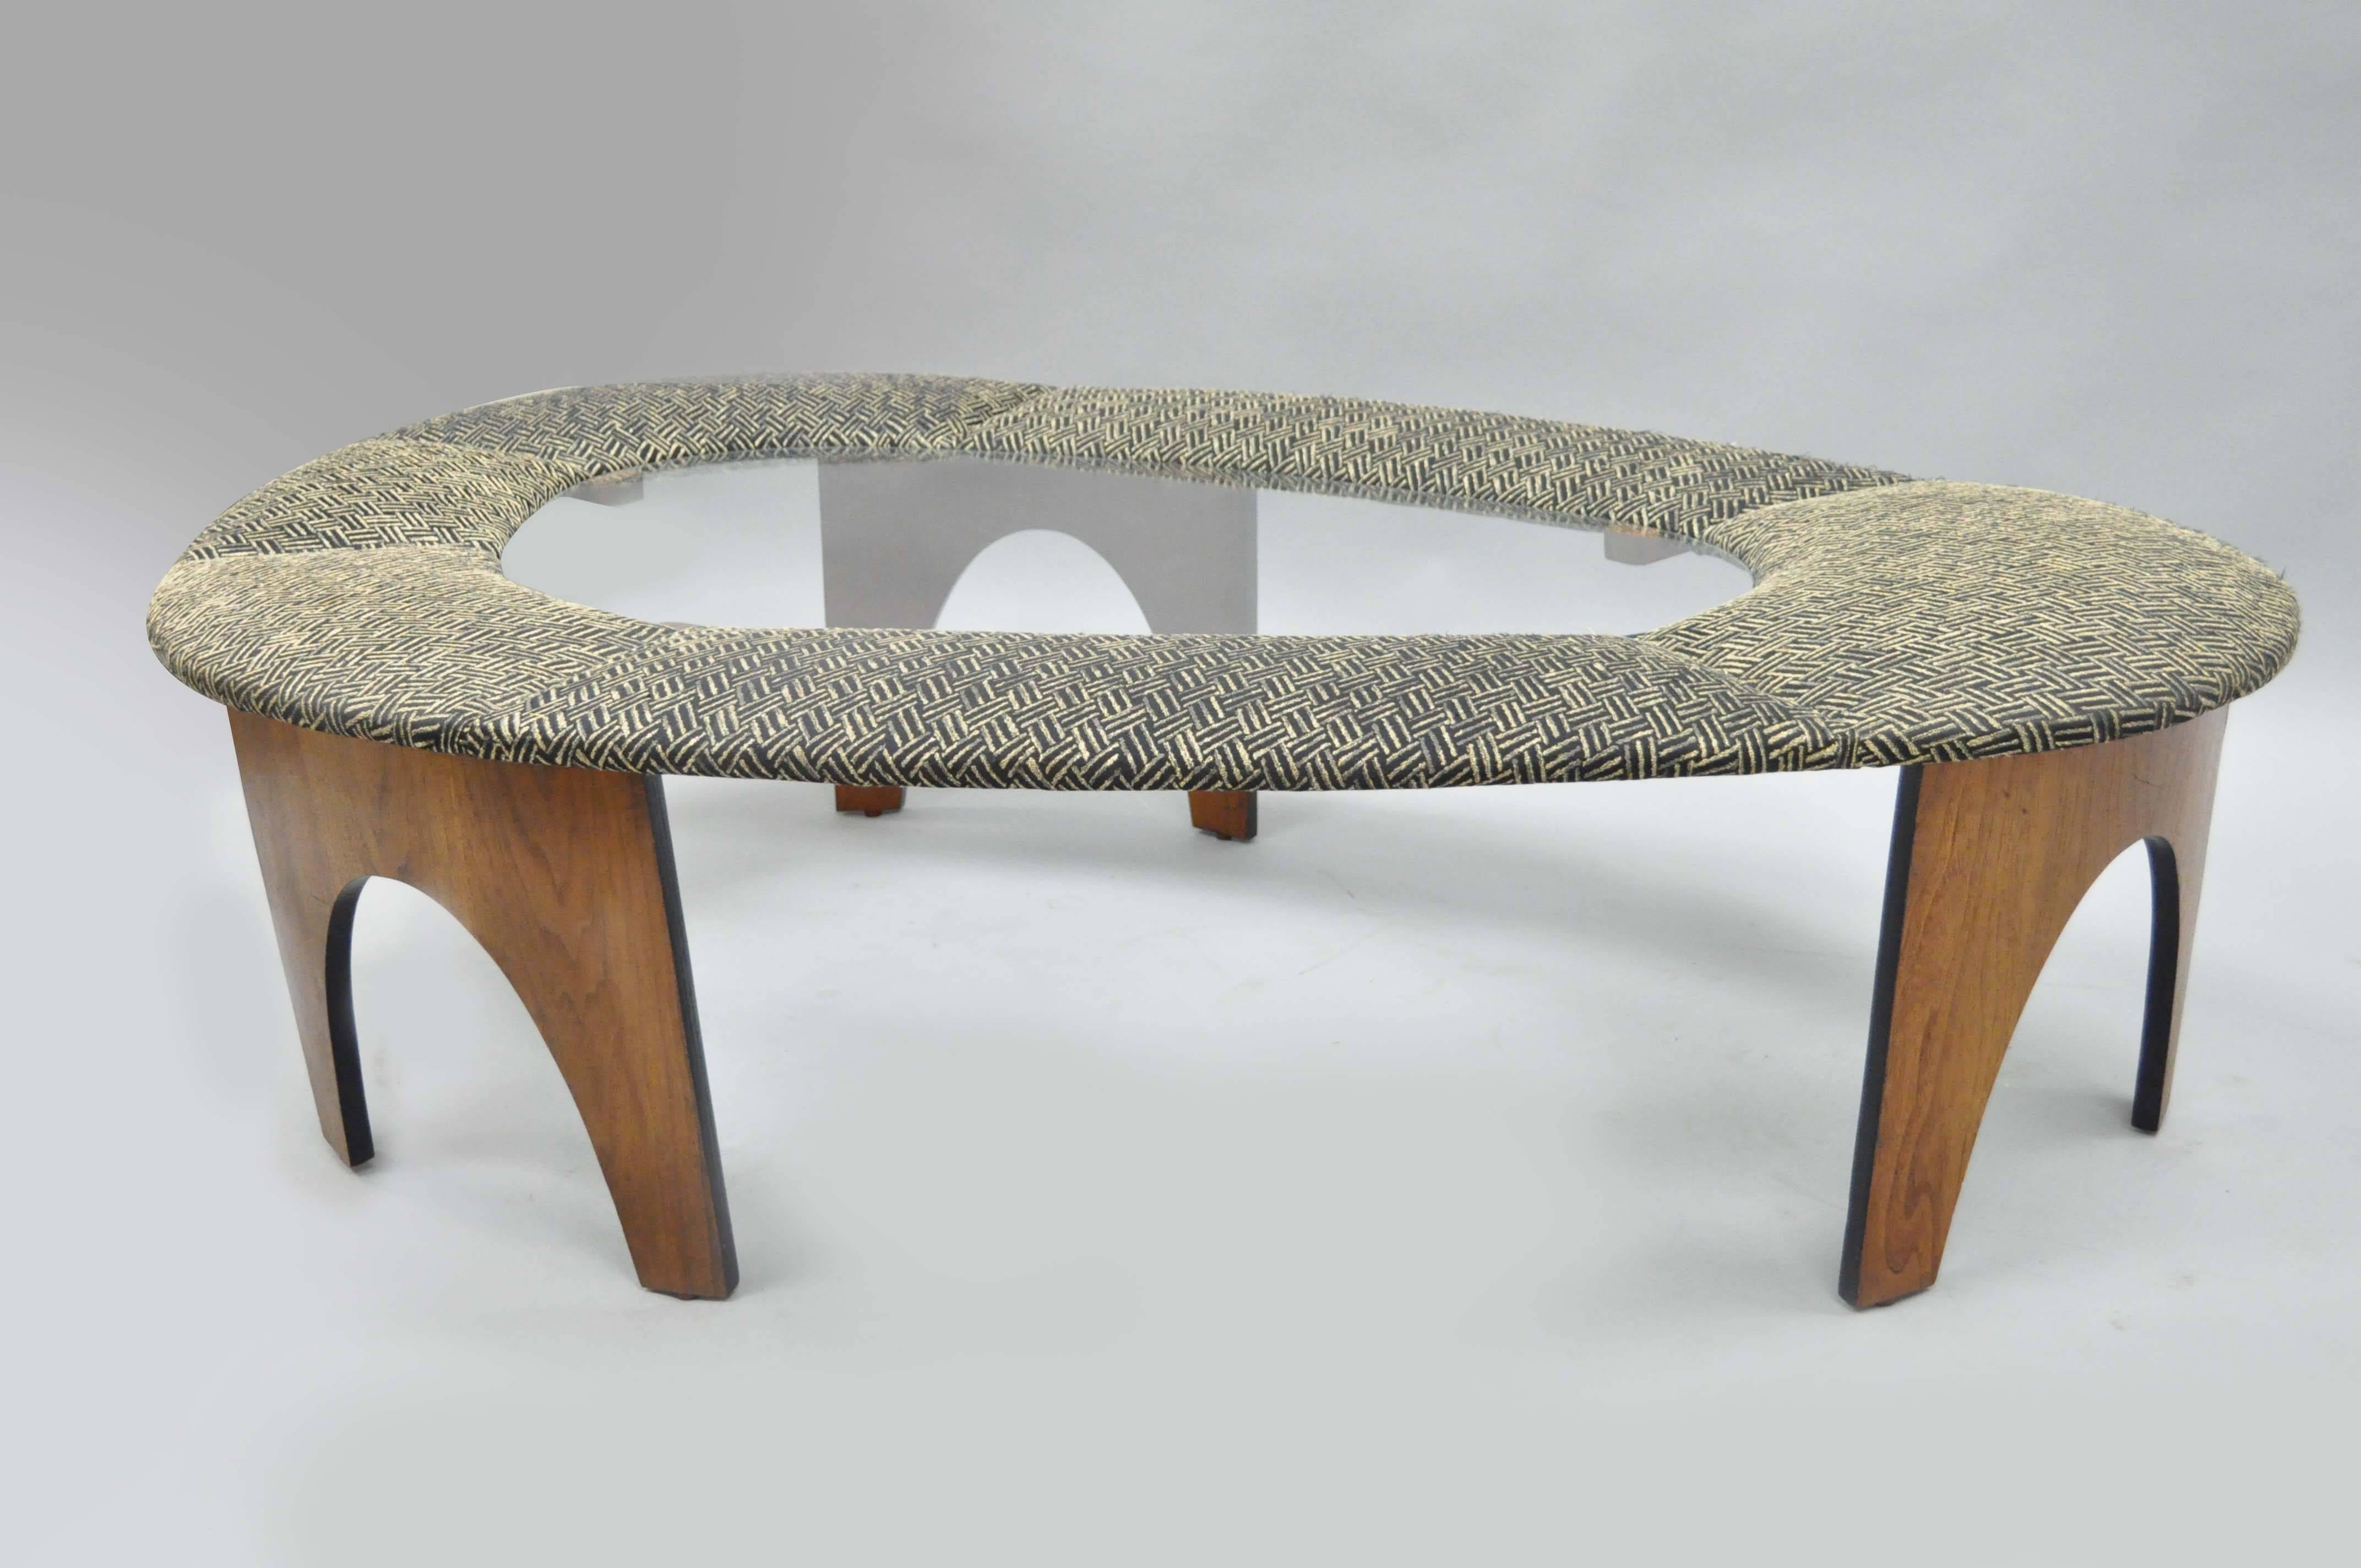 Very rare Mid-Century Modern arched coffee table by Henry P glass from the intimate island suite for The Richbilt Furniture Co. Item features walnut veneer arched legs over a bent plywood frame, beautiful wood grain throughout, upholstered top and